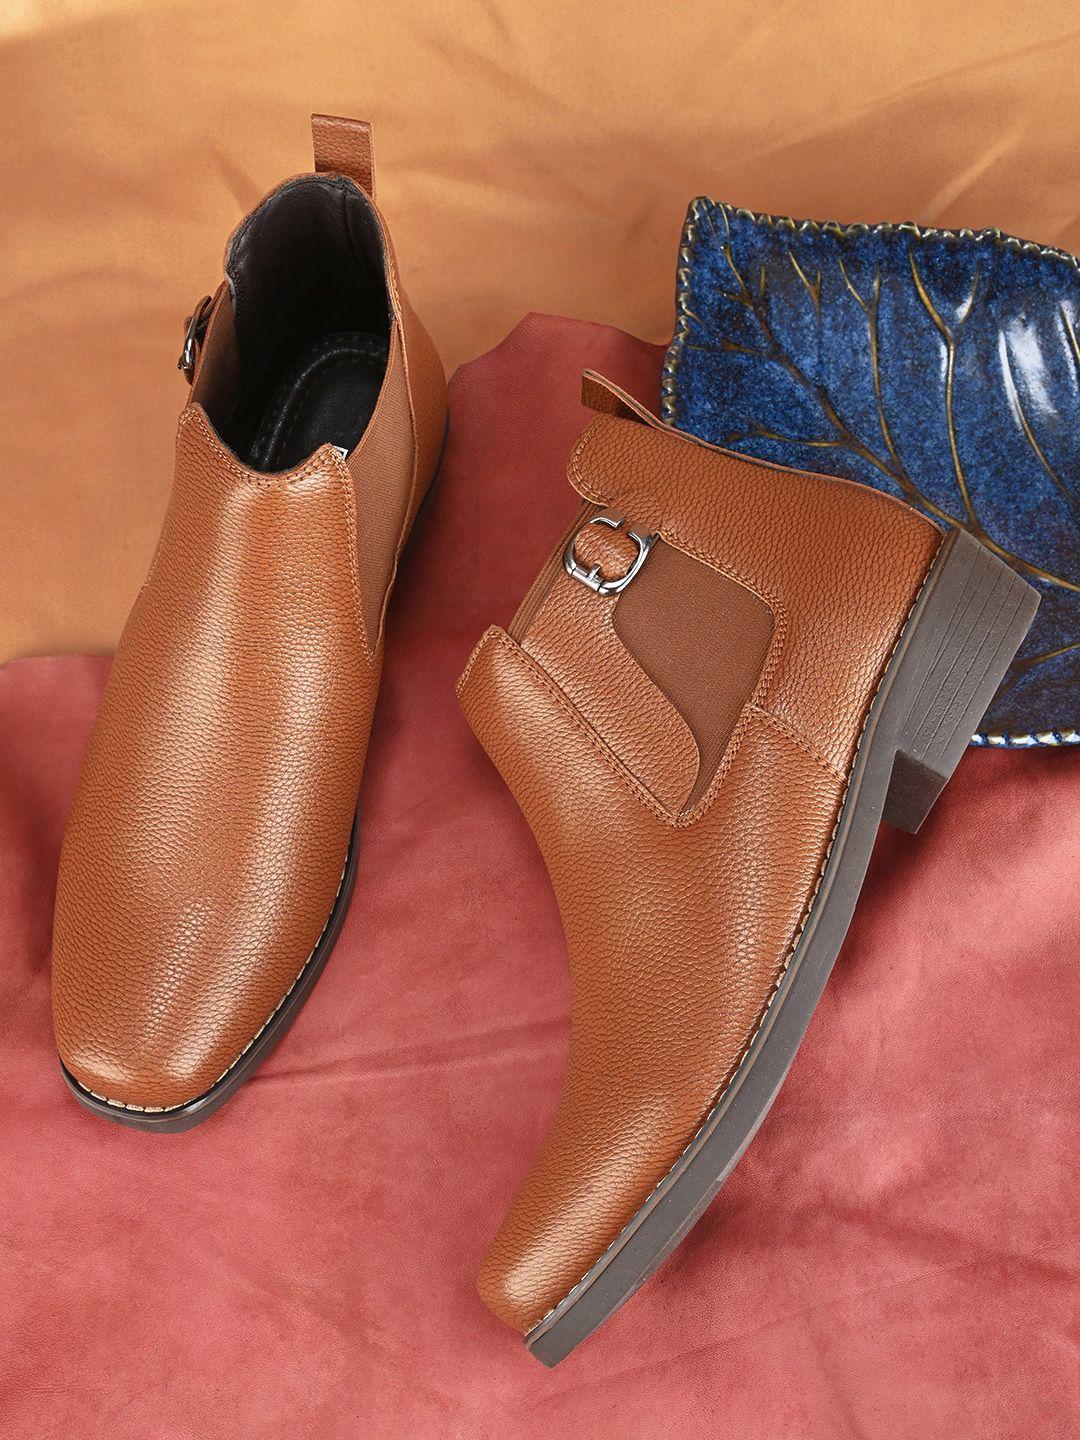 the roadster lifestyle co. men tan brown mid top block-heel chelsea boots with buckle